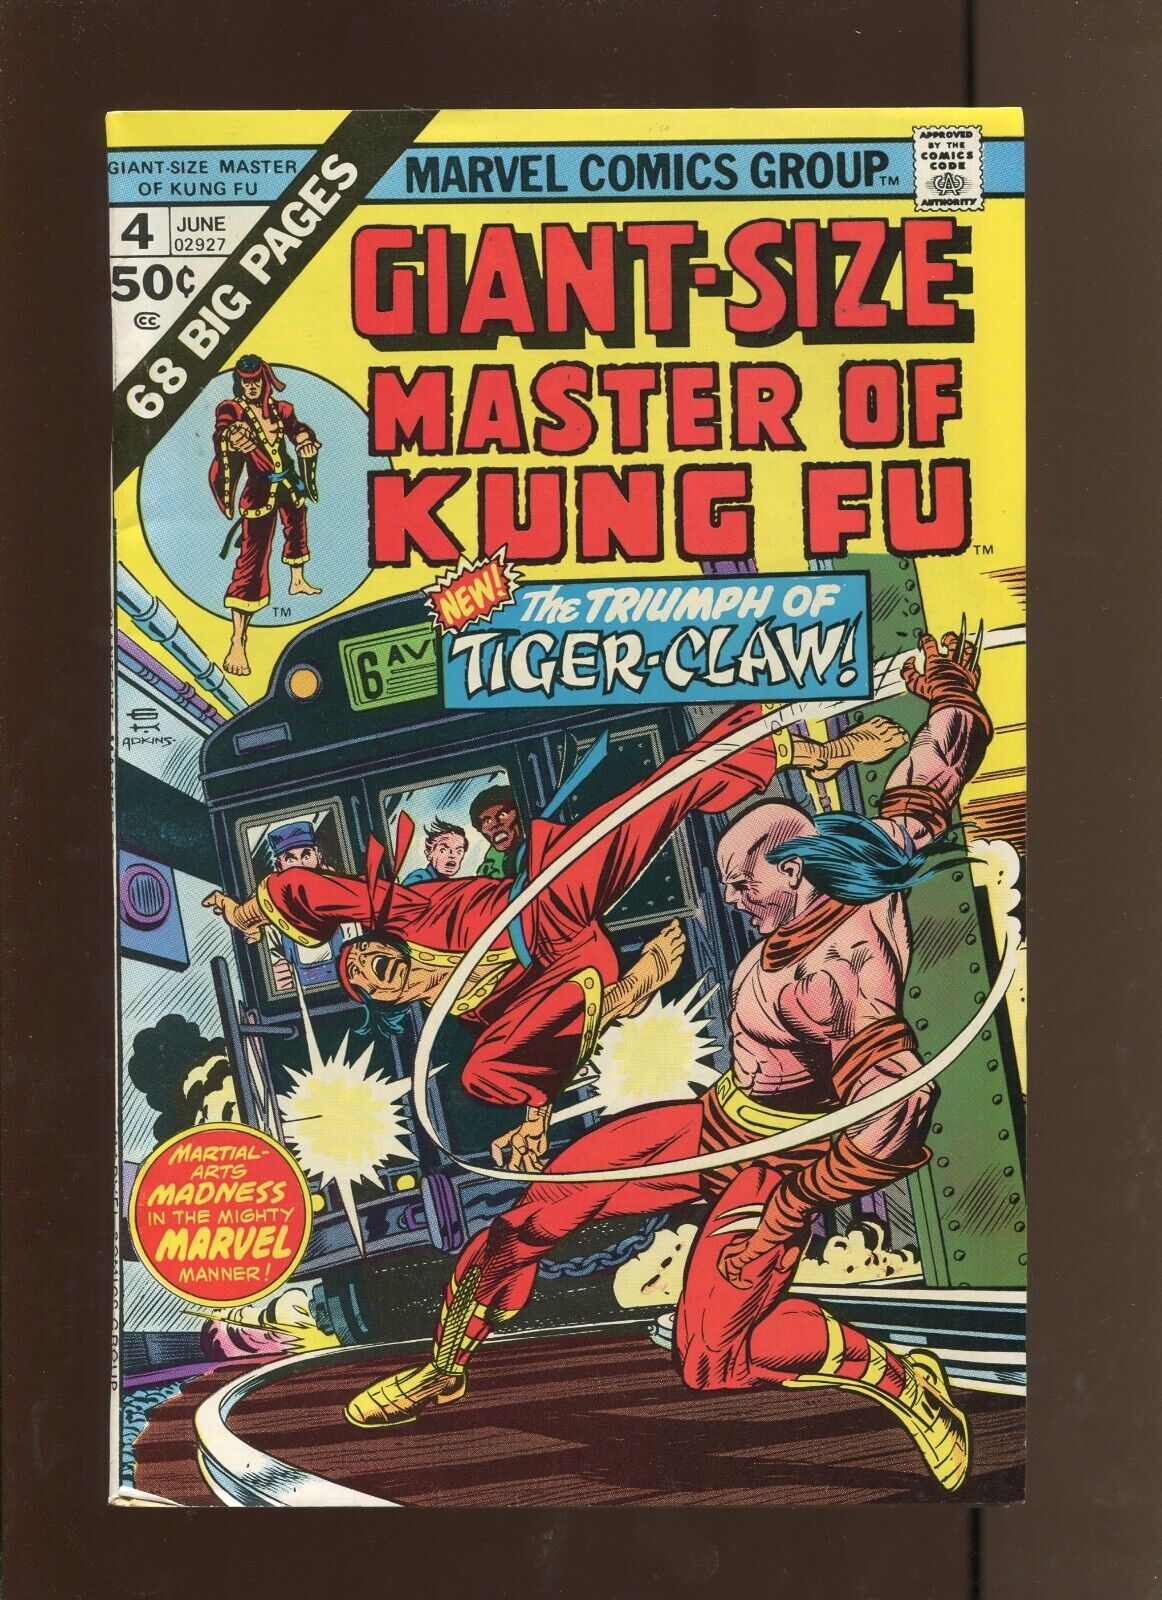 Giant Size Master Of Kung Fu #4 - Tiger Claw (8.0) 1975